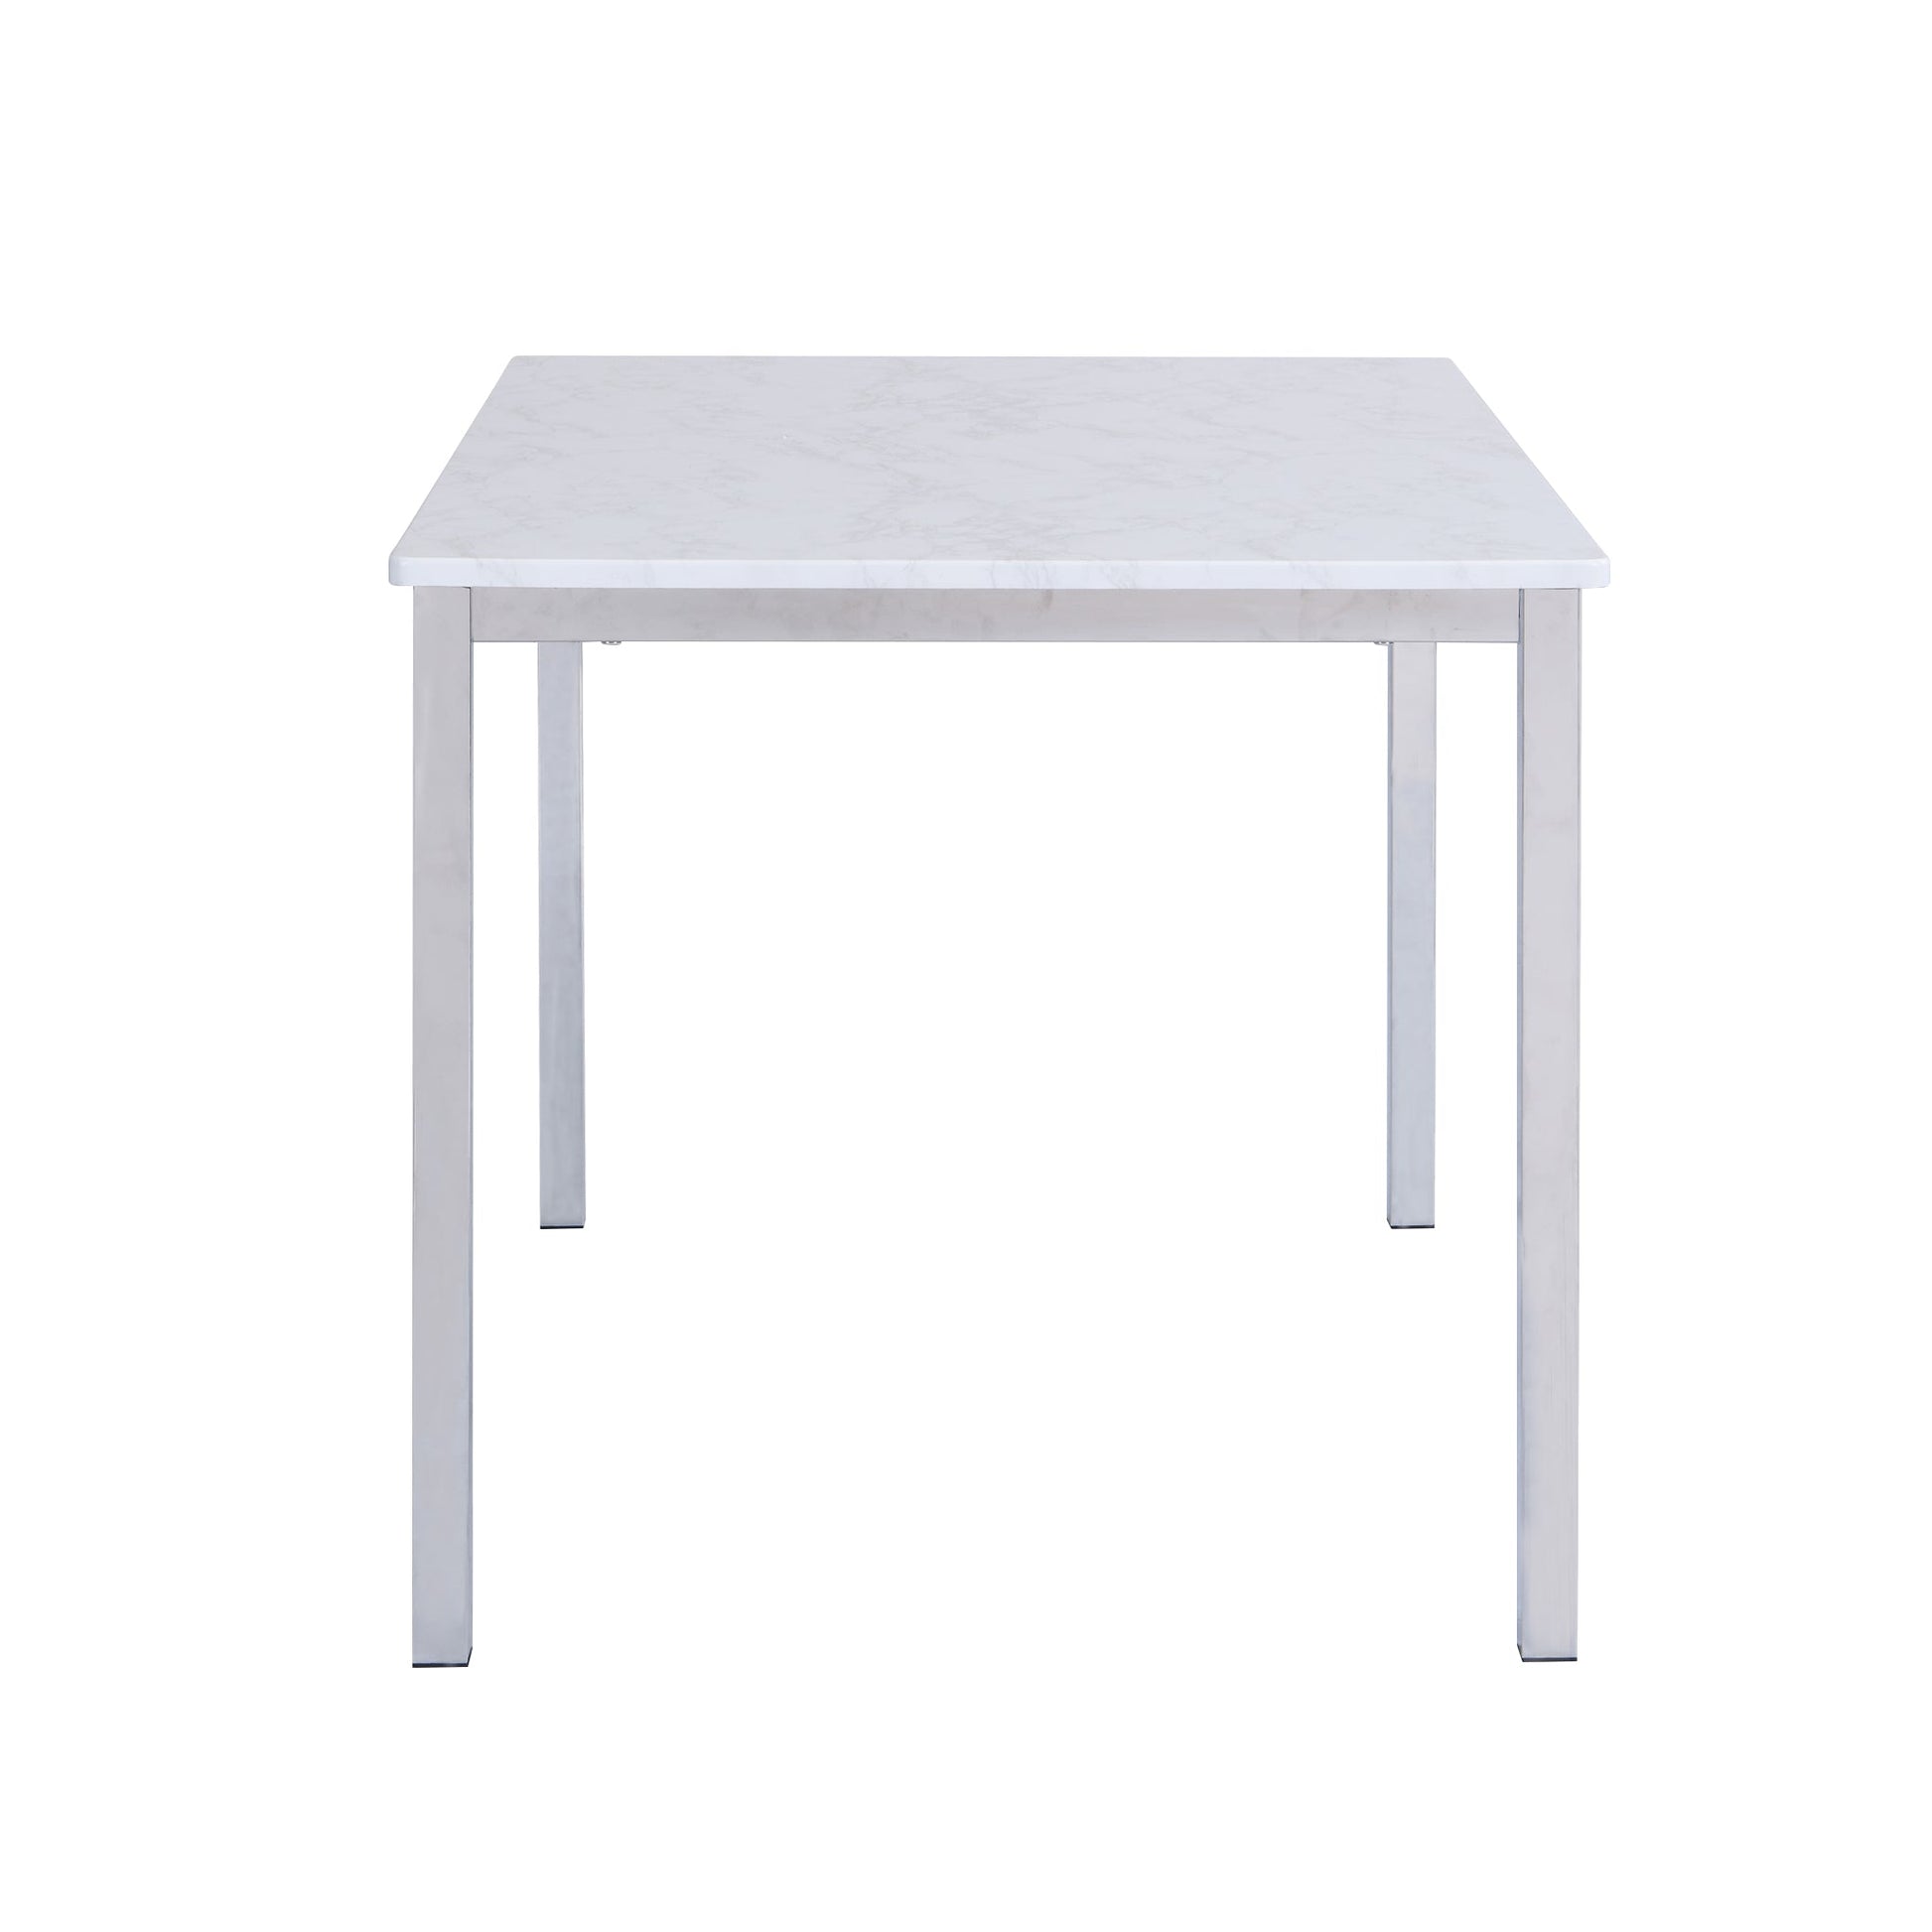 Milo dining table - 4 seater - marble effect and chrome - Laura James